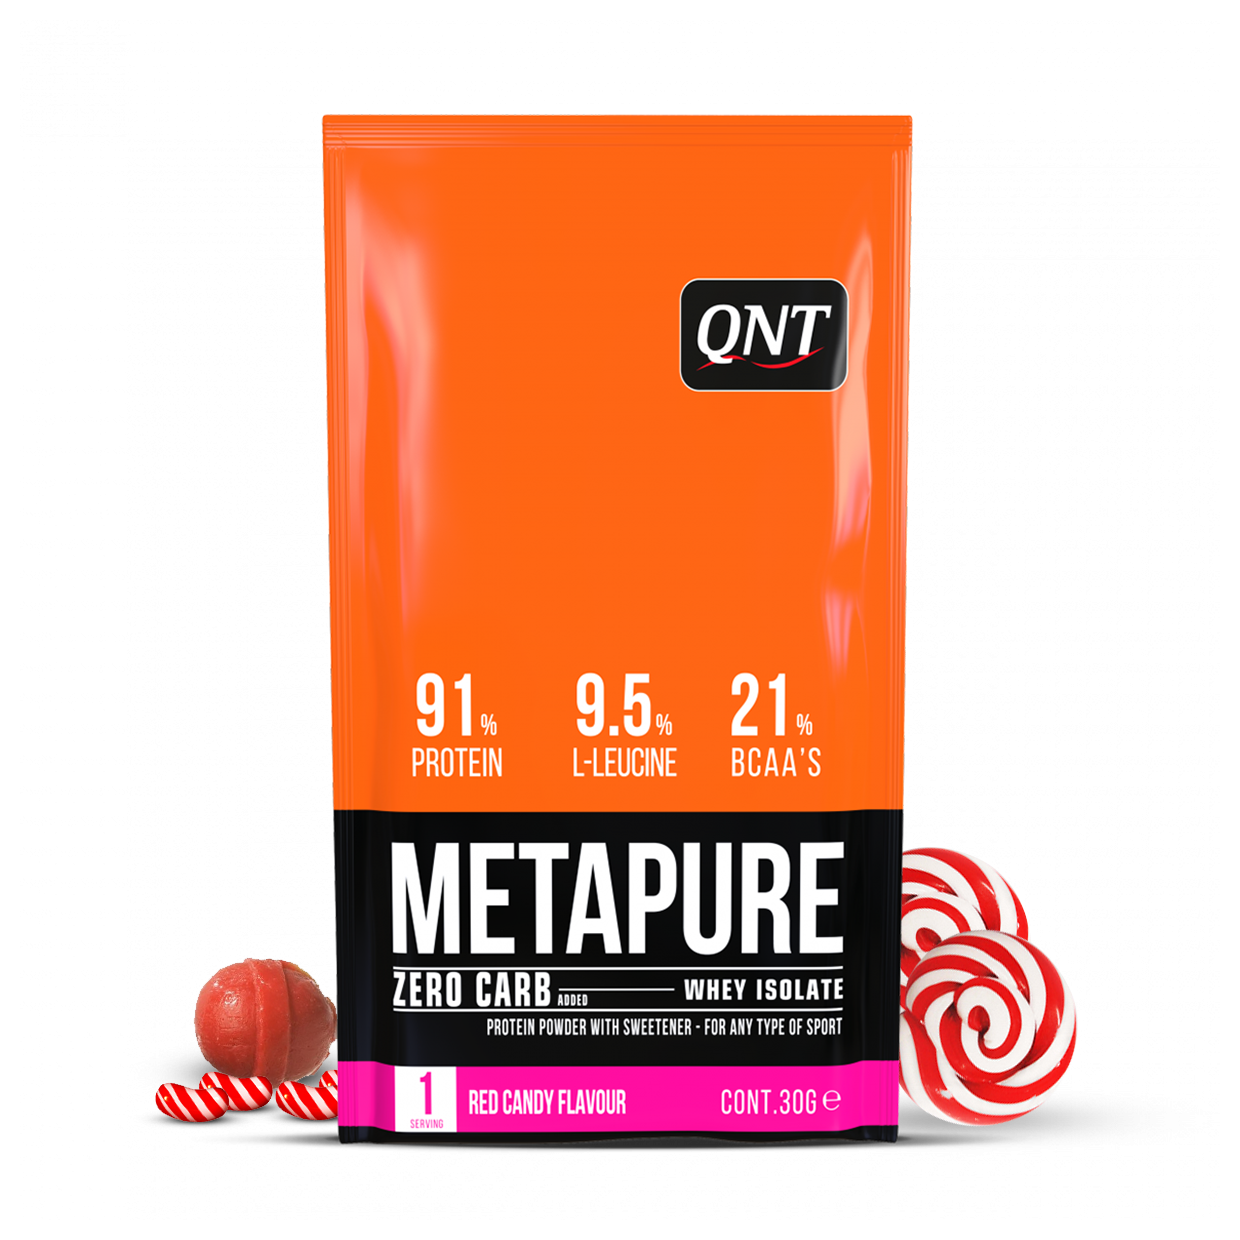 QNT Metapure Zero Carb Red Candy 30g/ Метапьюр Зеро Карб 30г Красная конфета